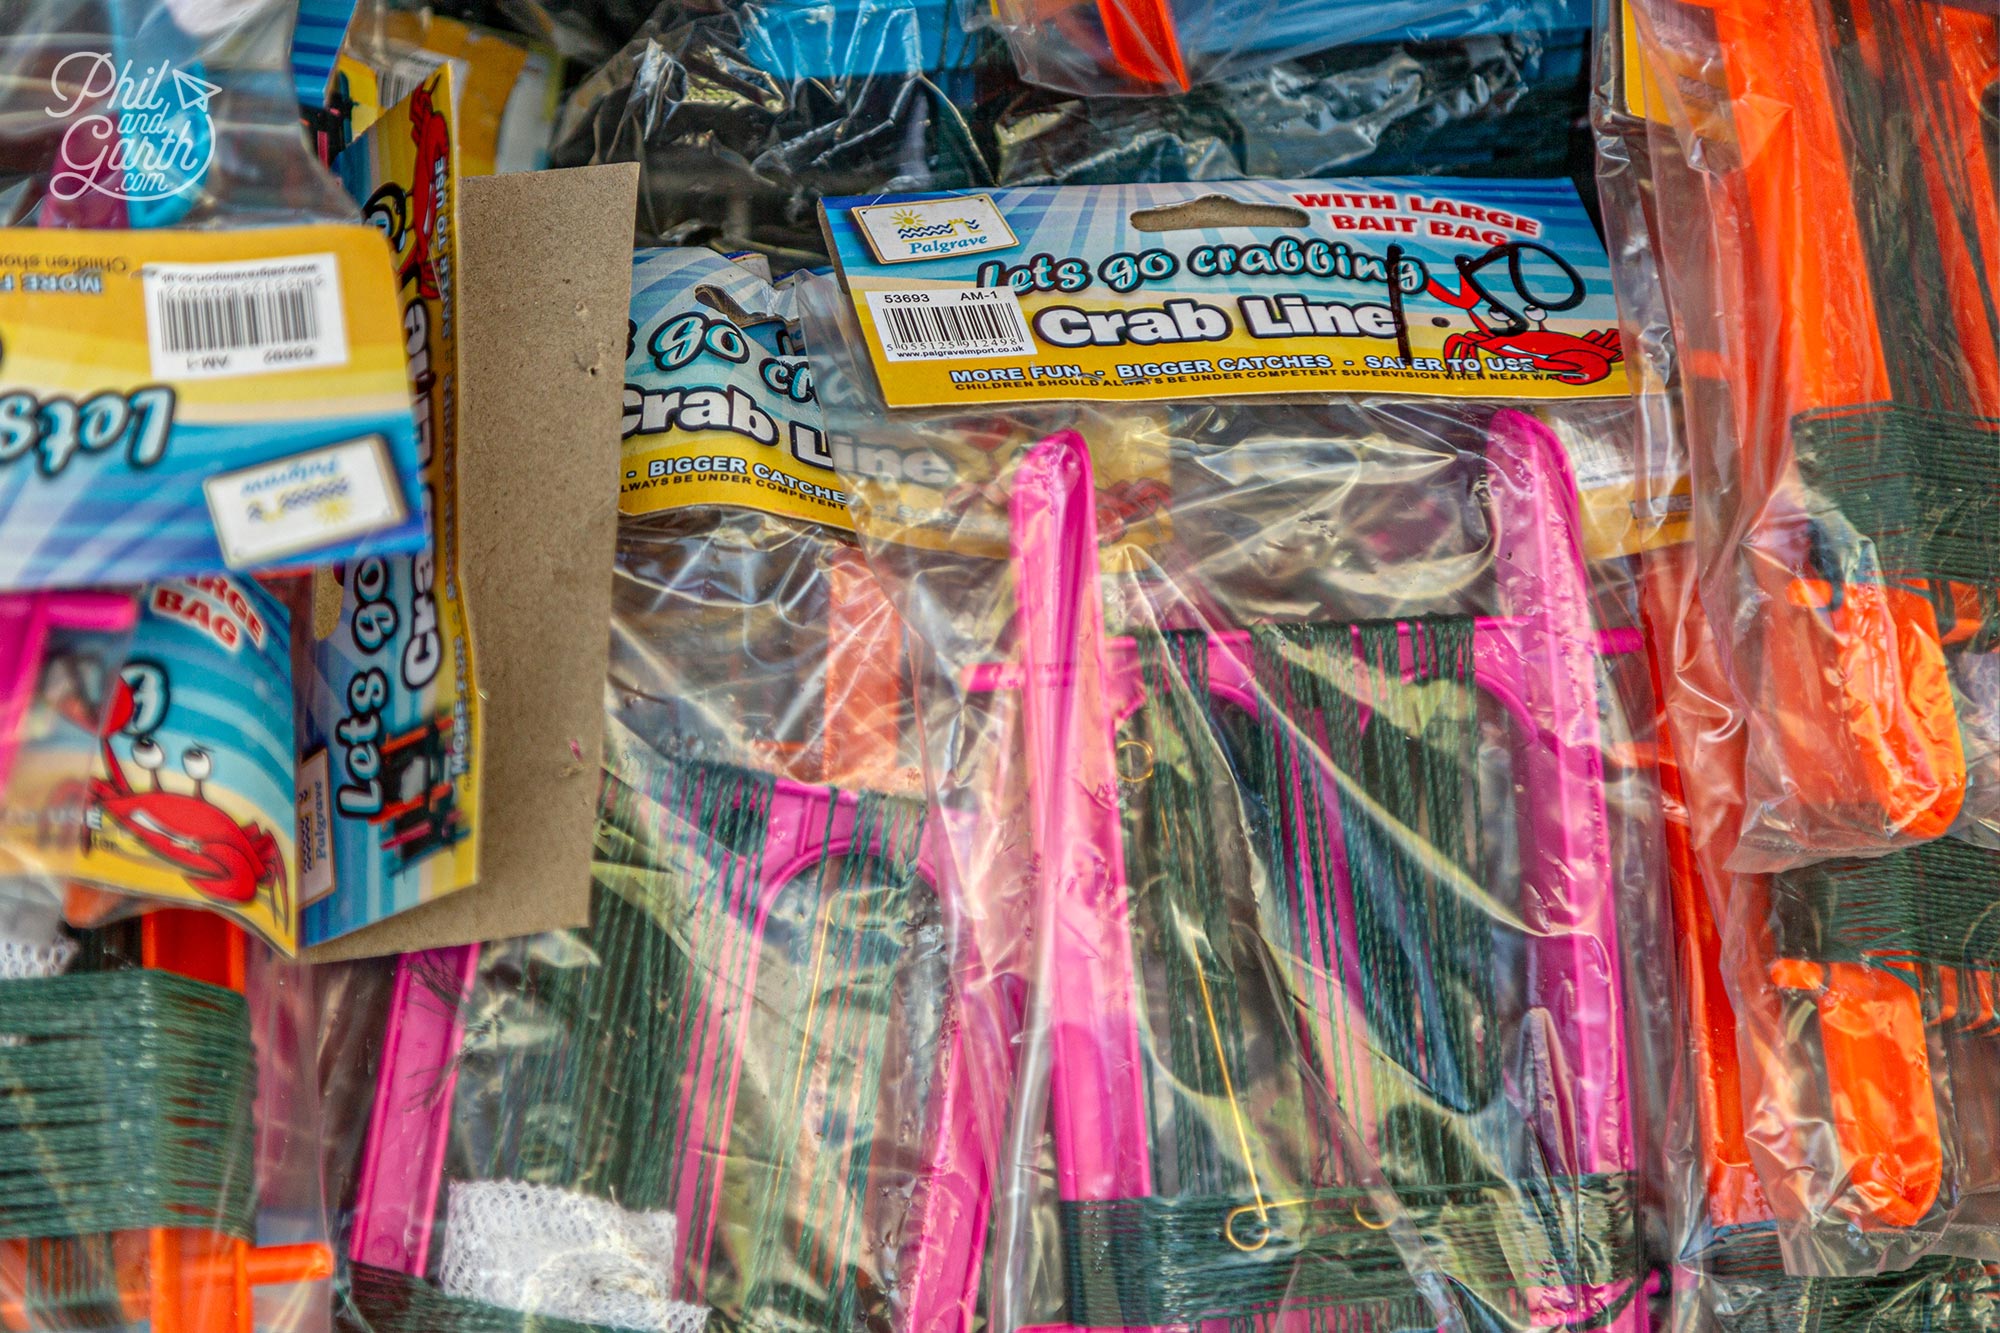 Crabbing kits are easily available to buy in the Whitby souvenir shops